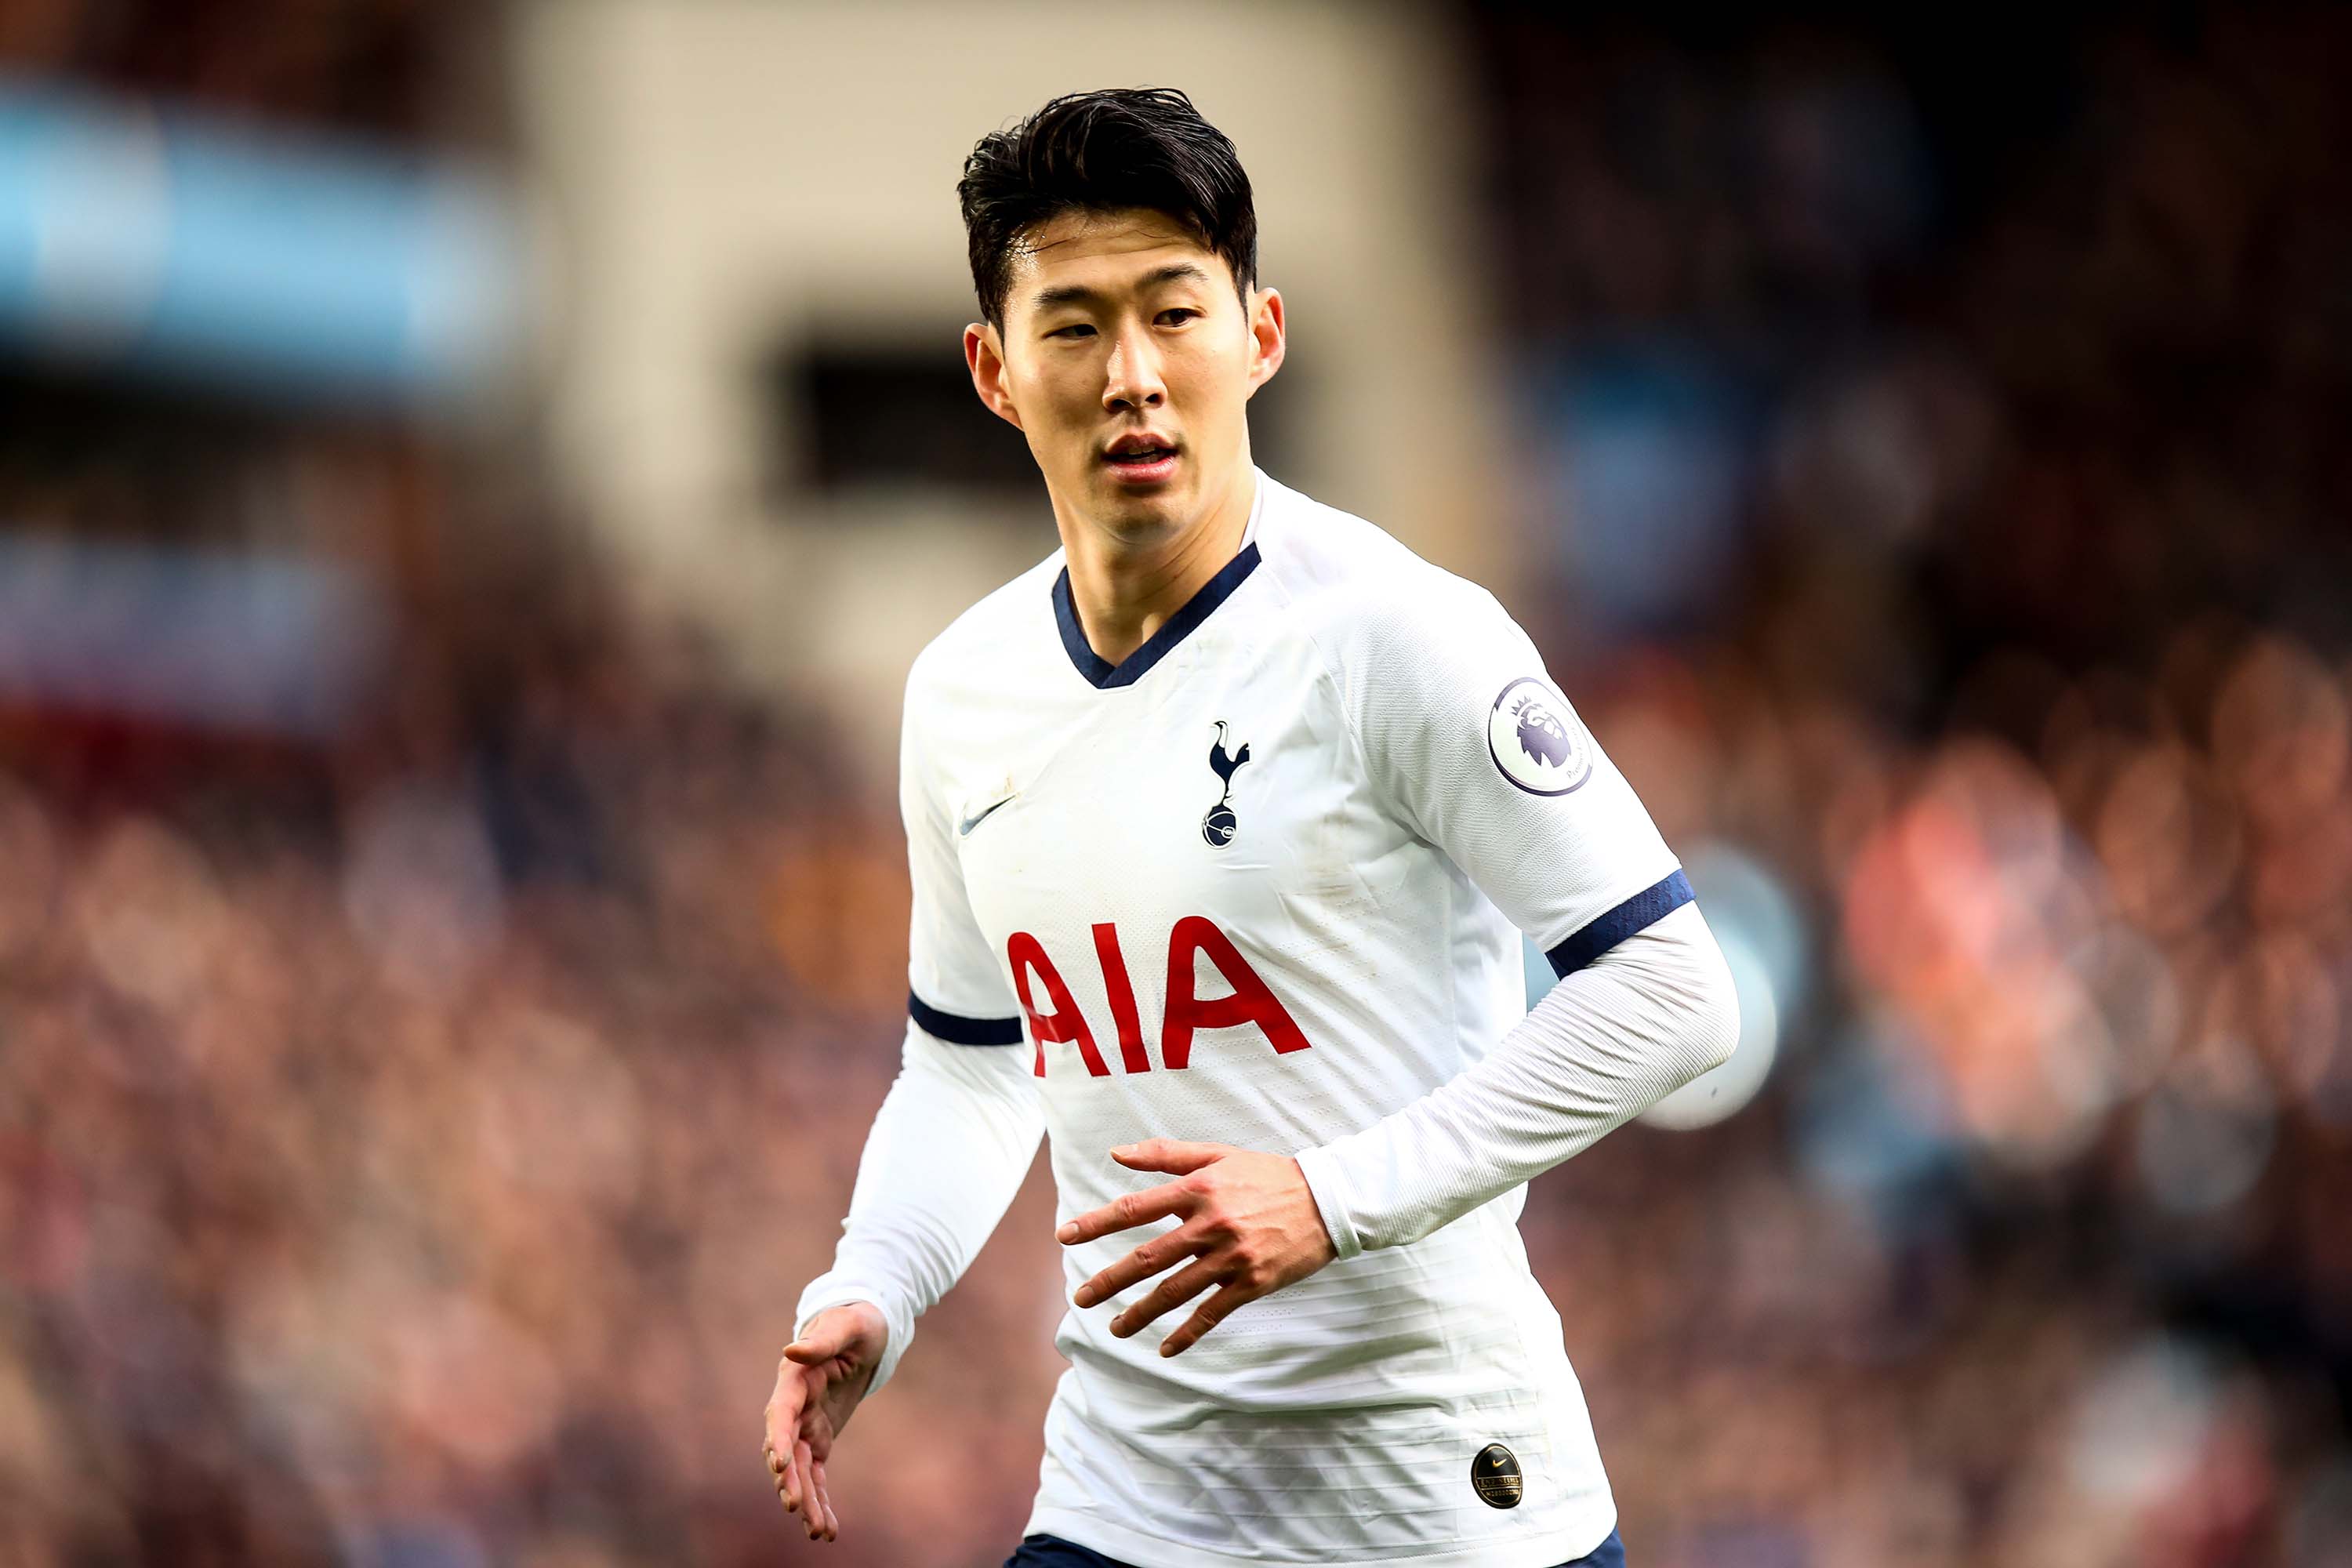 Son Heung-Min is pictured during a Premier League match between Aston Villa and Tottenham Hotspur in Birmingham, England, on February 16.